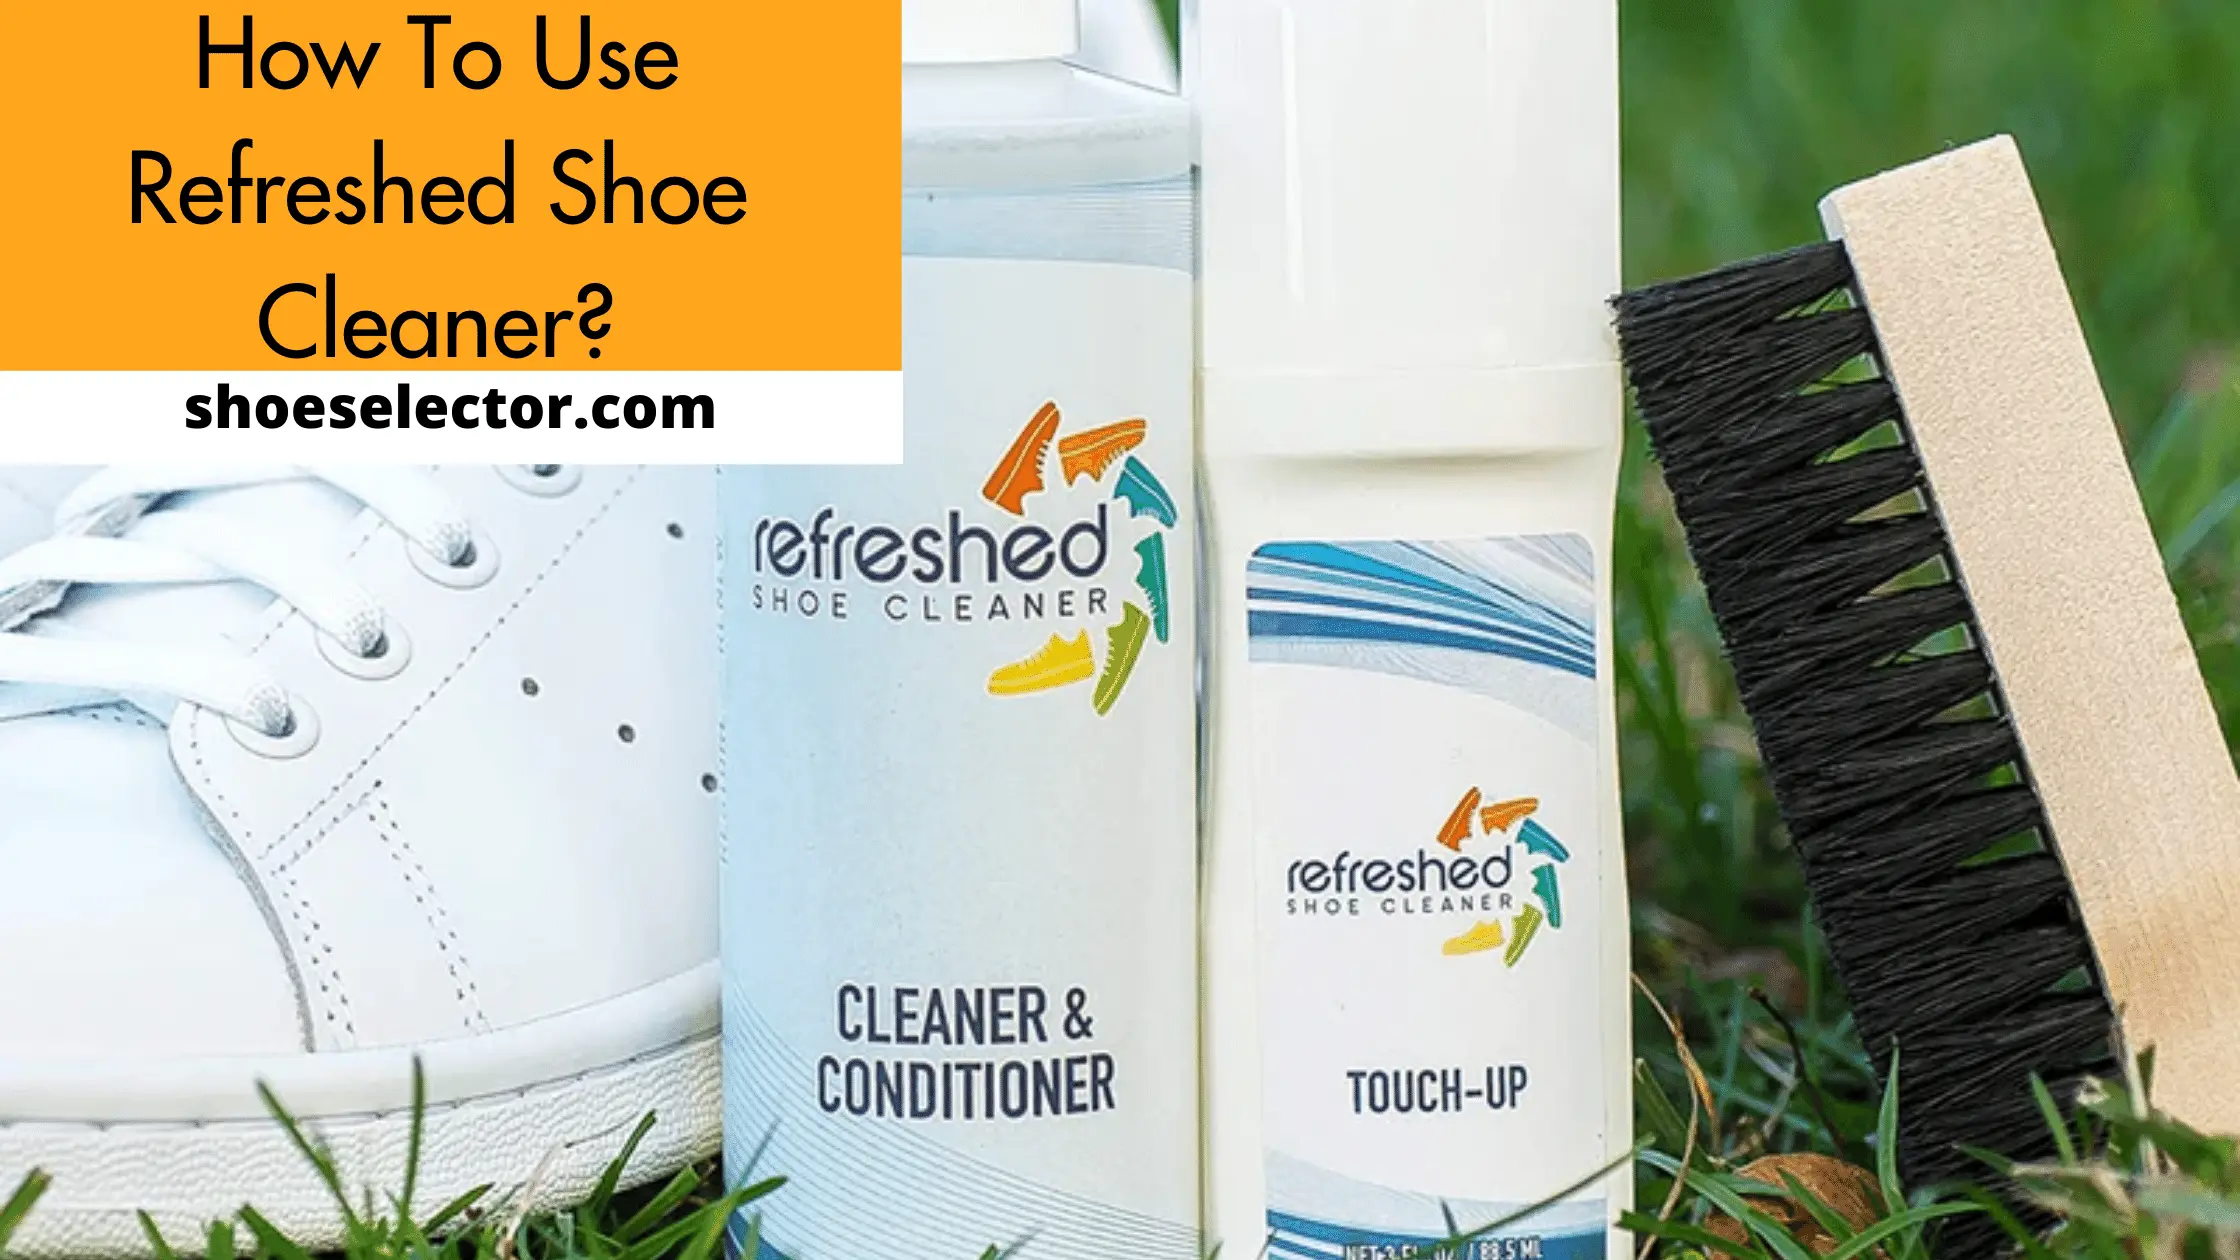 How to Use Refreshed Shoe Cleaner? Quick Guide